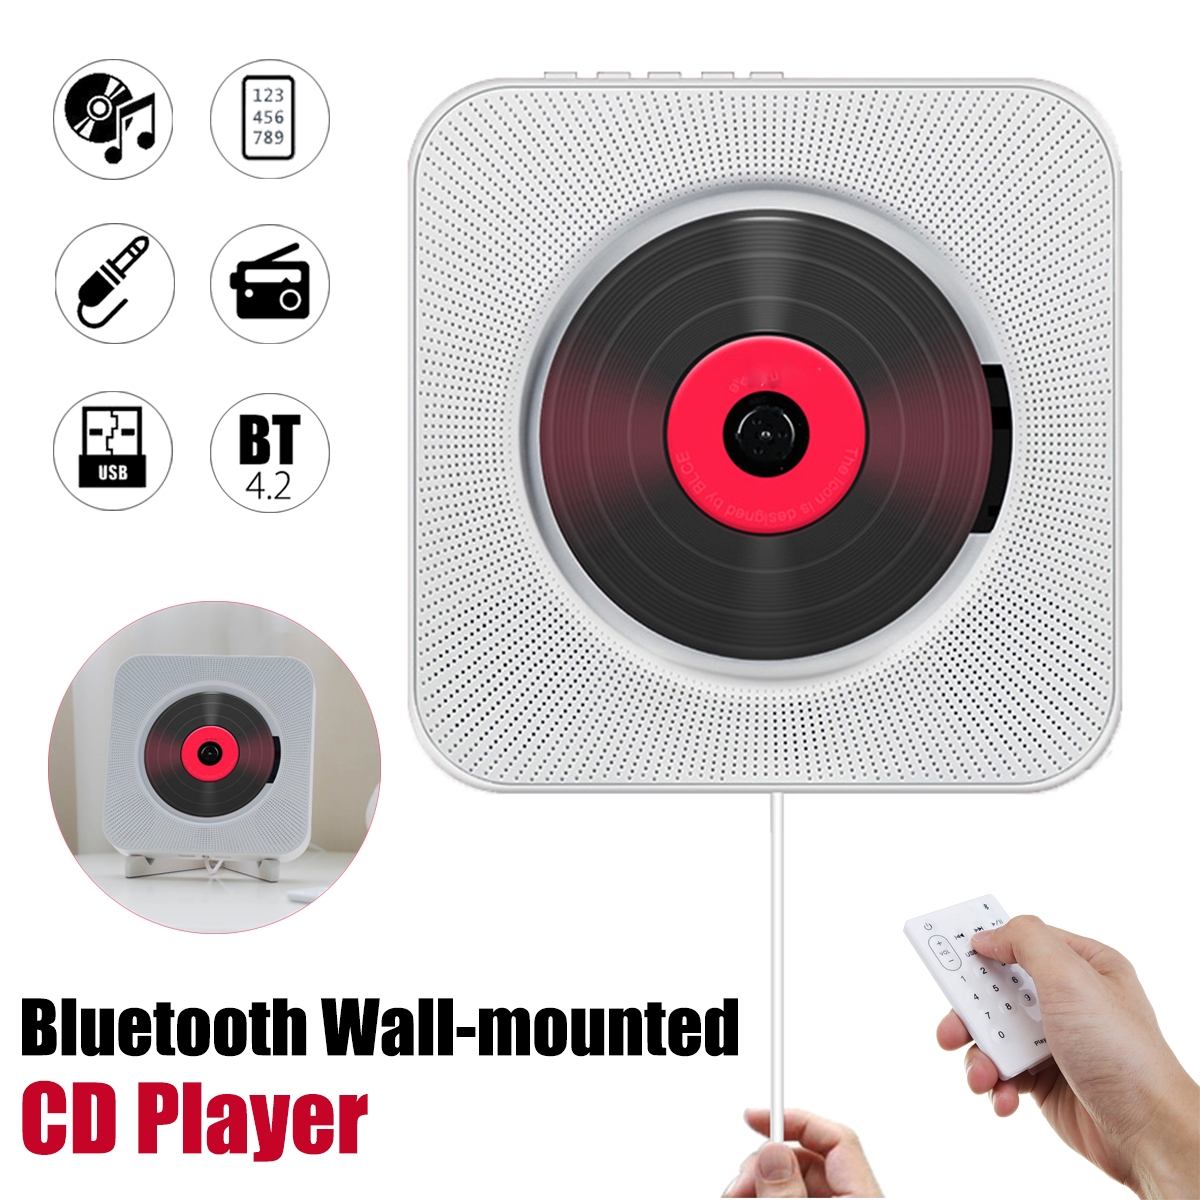 KC-808 Wall Mounted Bluetooth CD Player Portable Home Audio Box with Remote Control FM Radio Built-in HiFi Speakers MP3